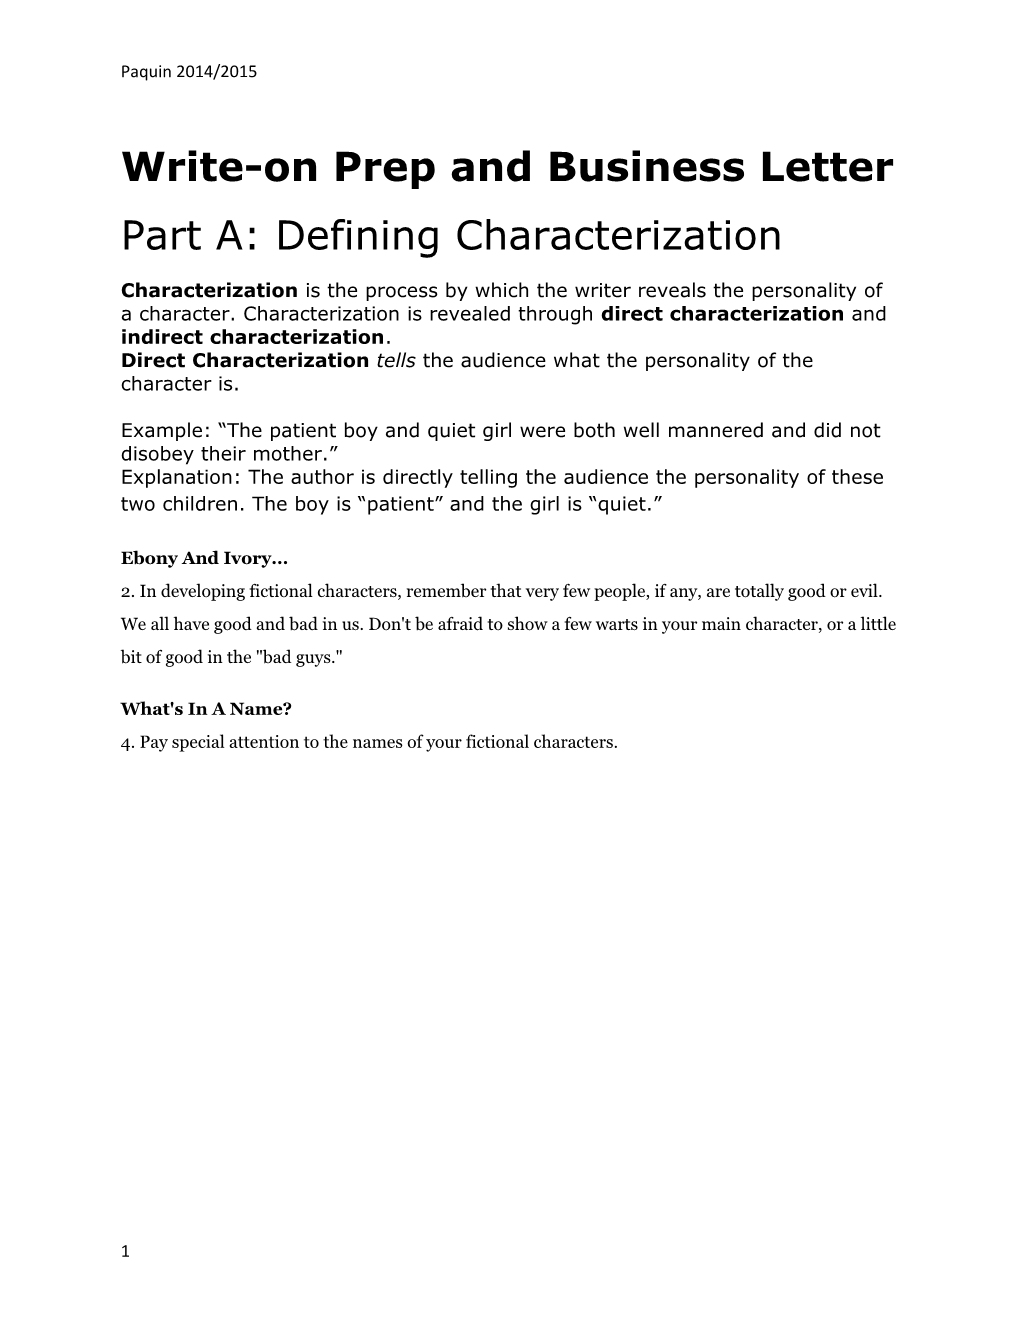 Write-On Prep and Business Letter